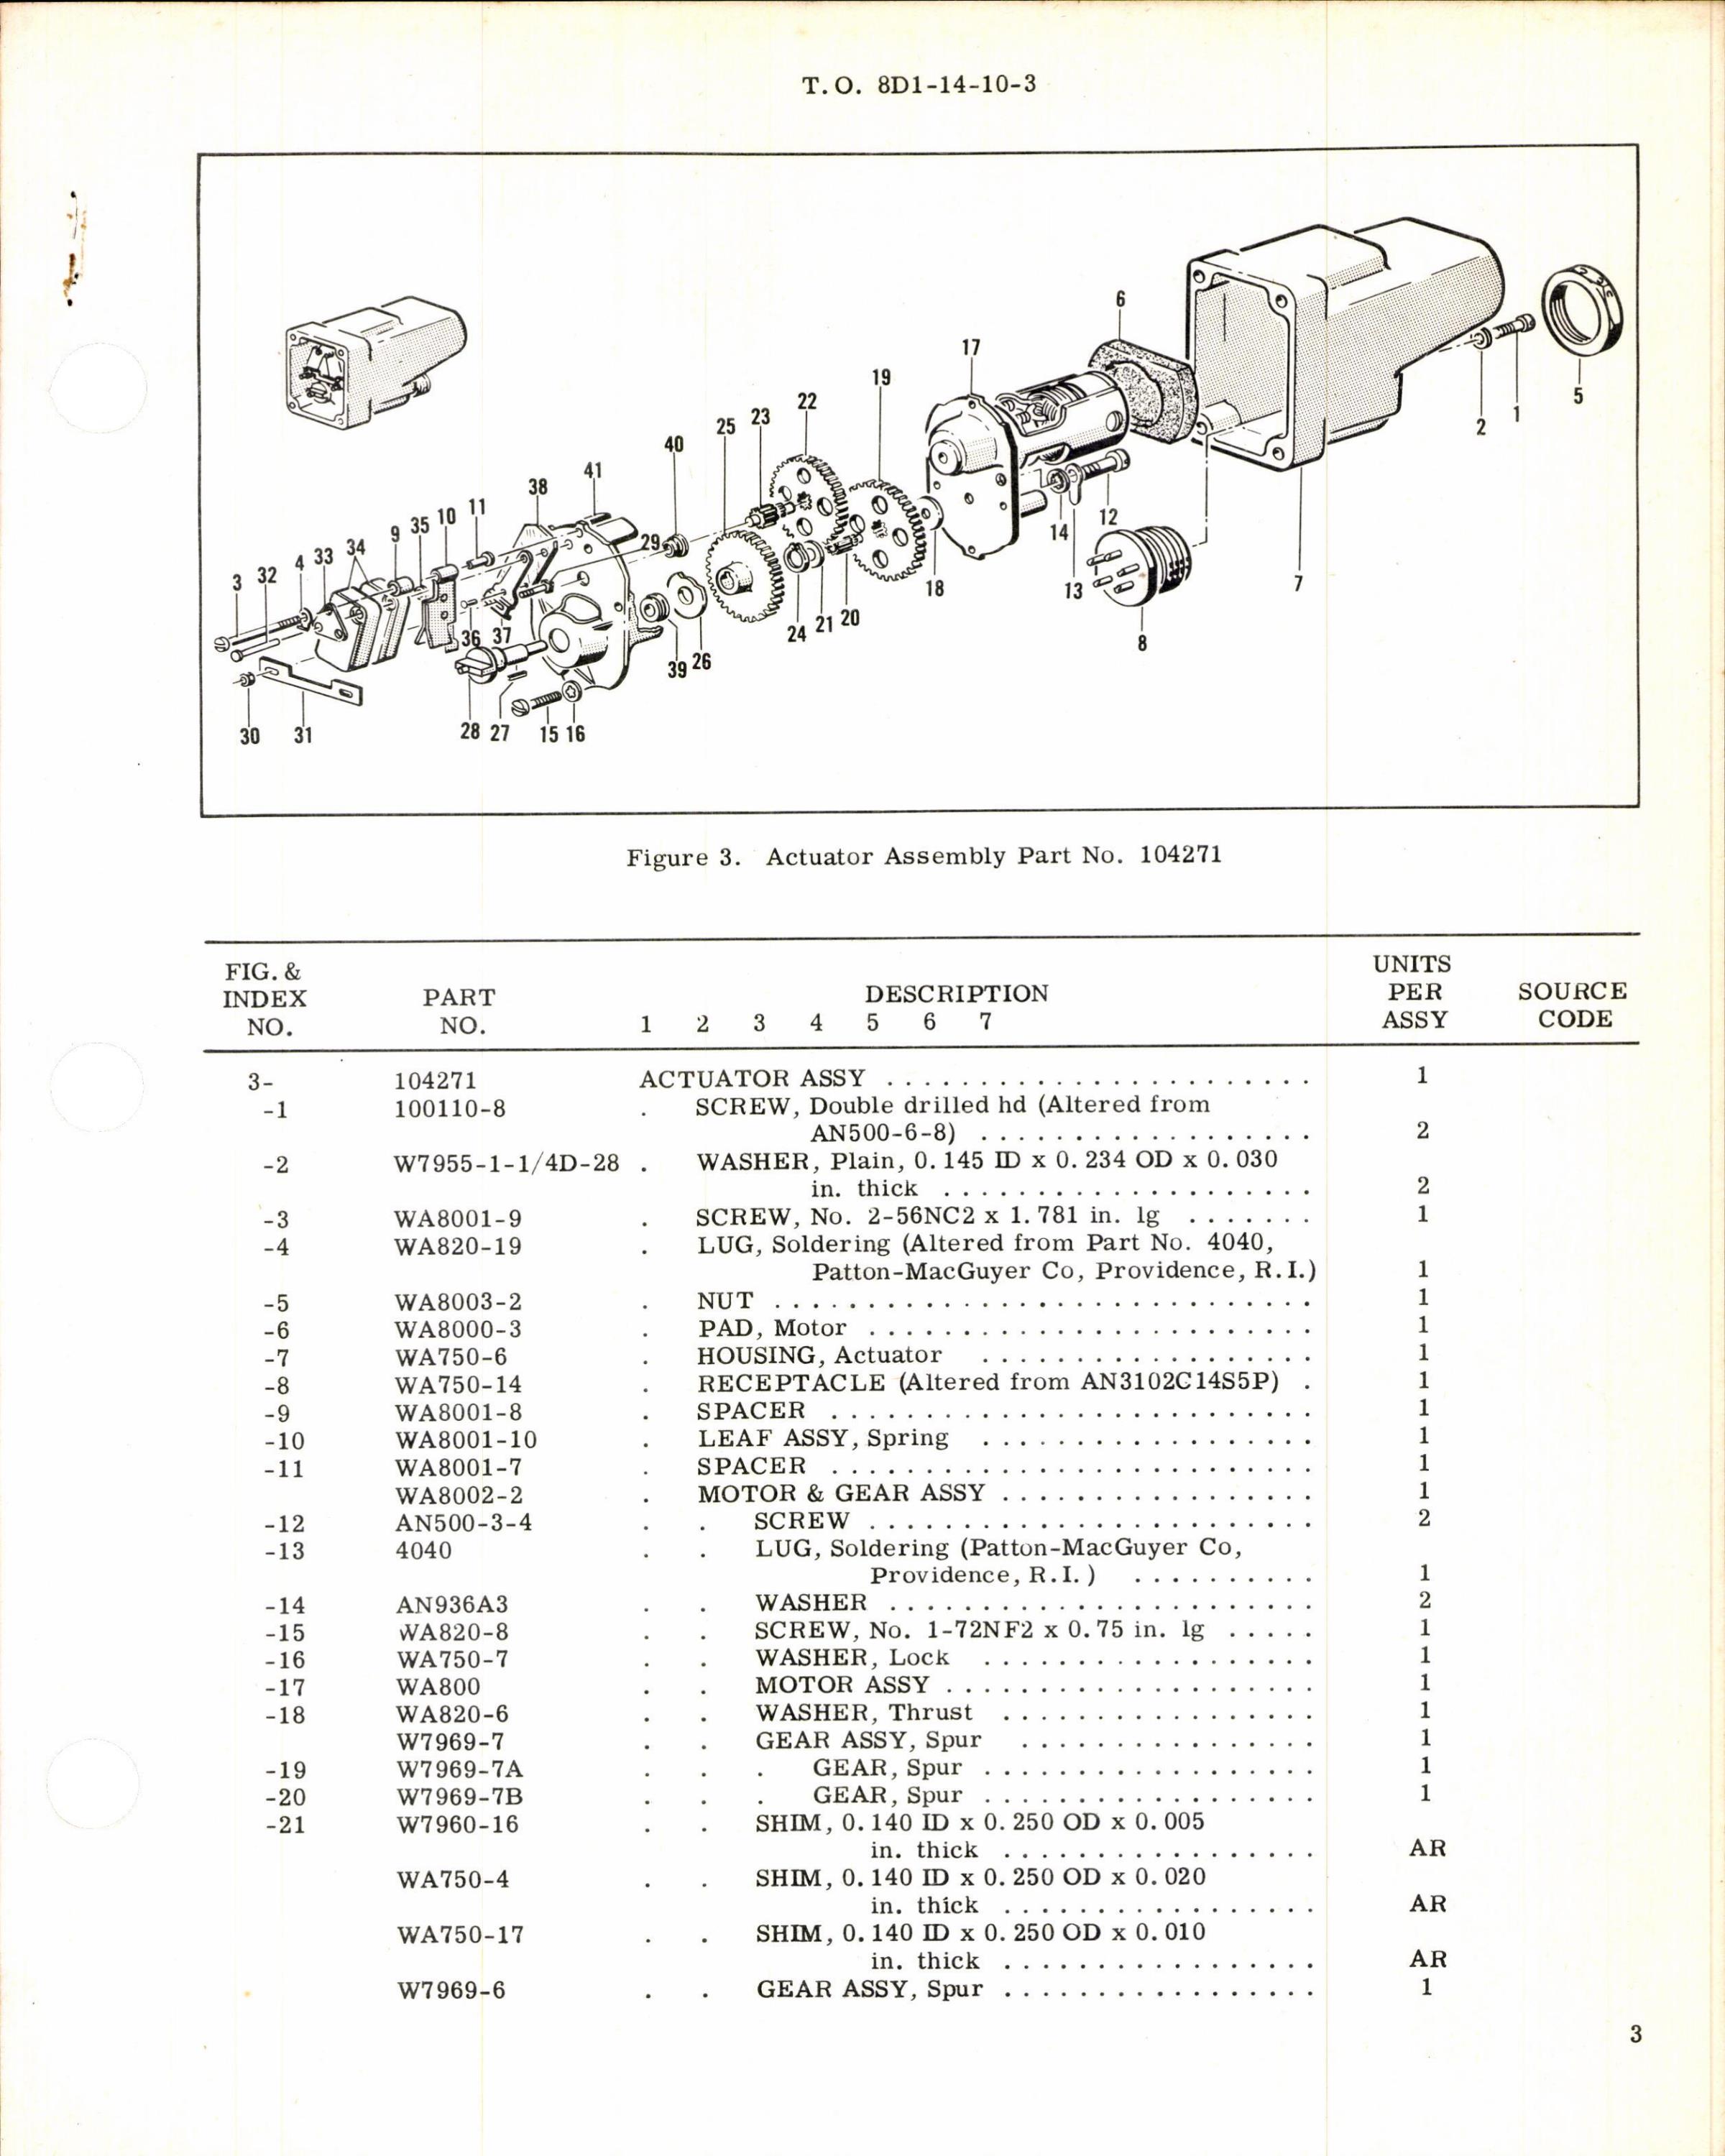 Sample page 3 from AirCorps Library document: Parts Breakdown for Actuator Assembly Part No 104271